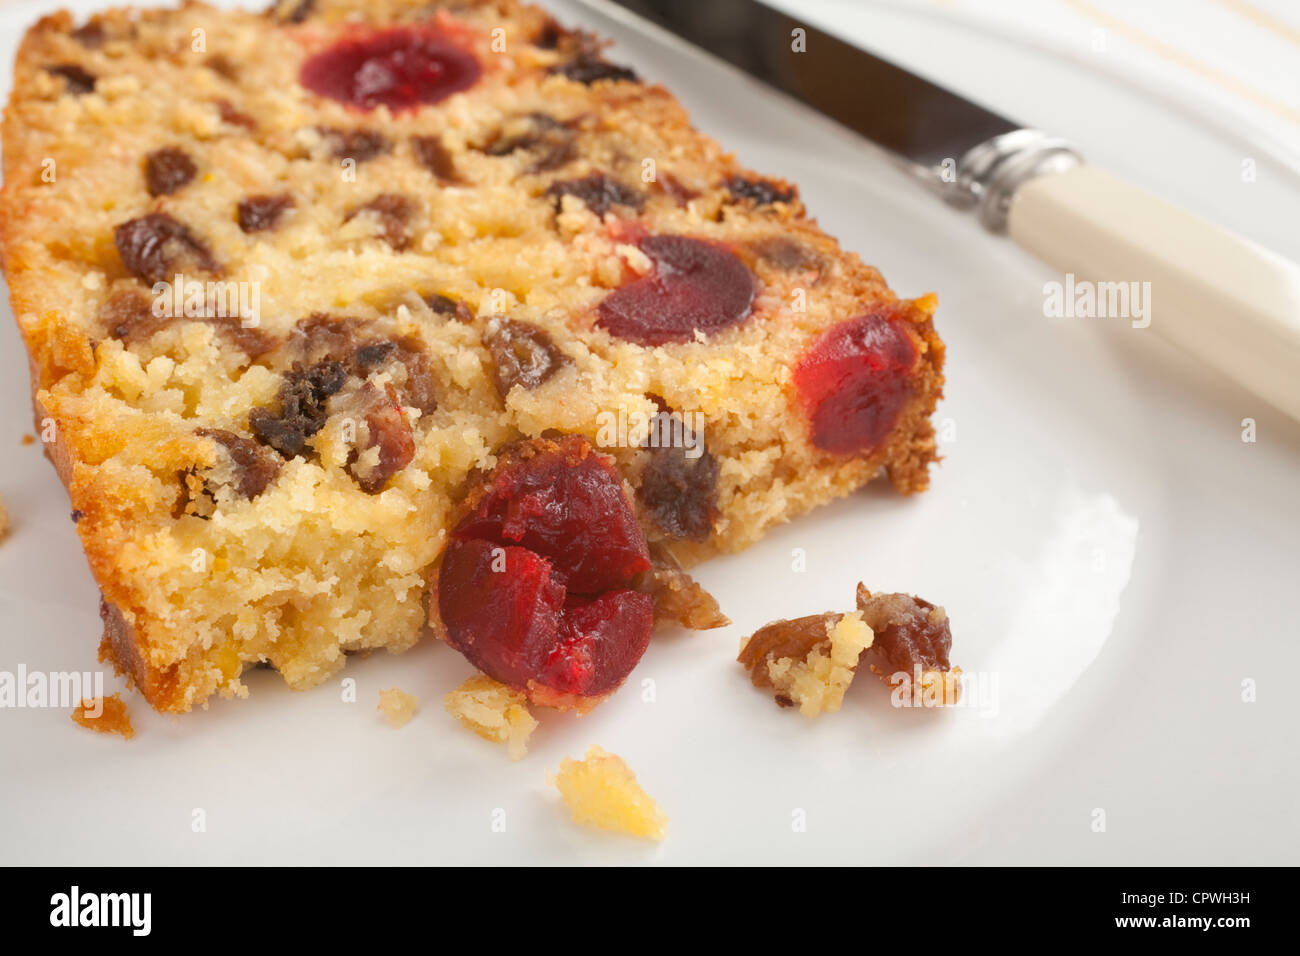 A slice of deliciously moist coconut fruit cake, stuffed with goodies like coconut, cherries, lemon and sultanas. Stock Photo